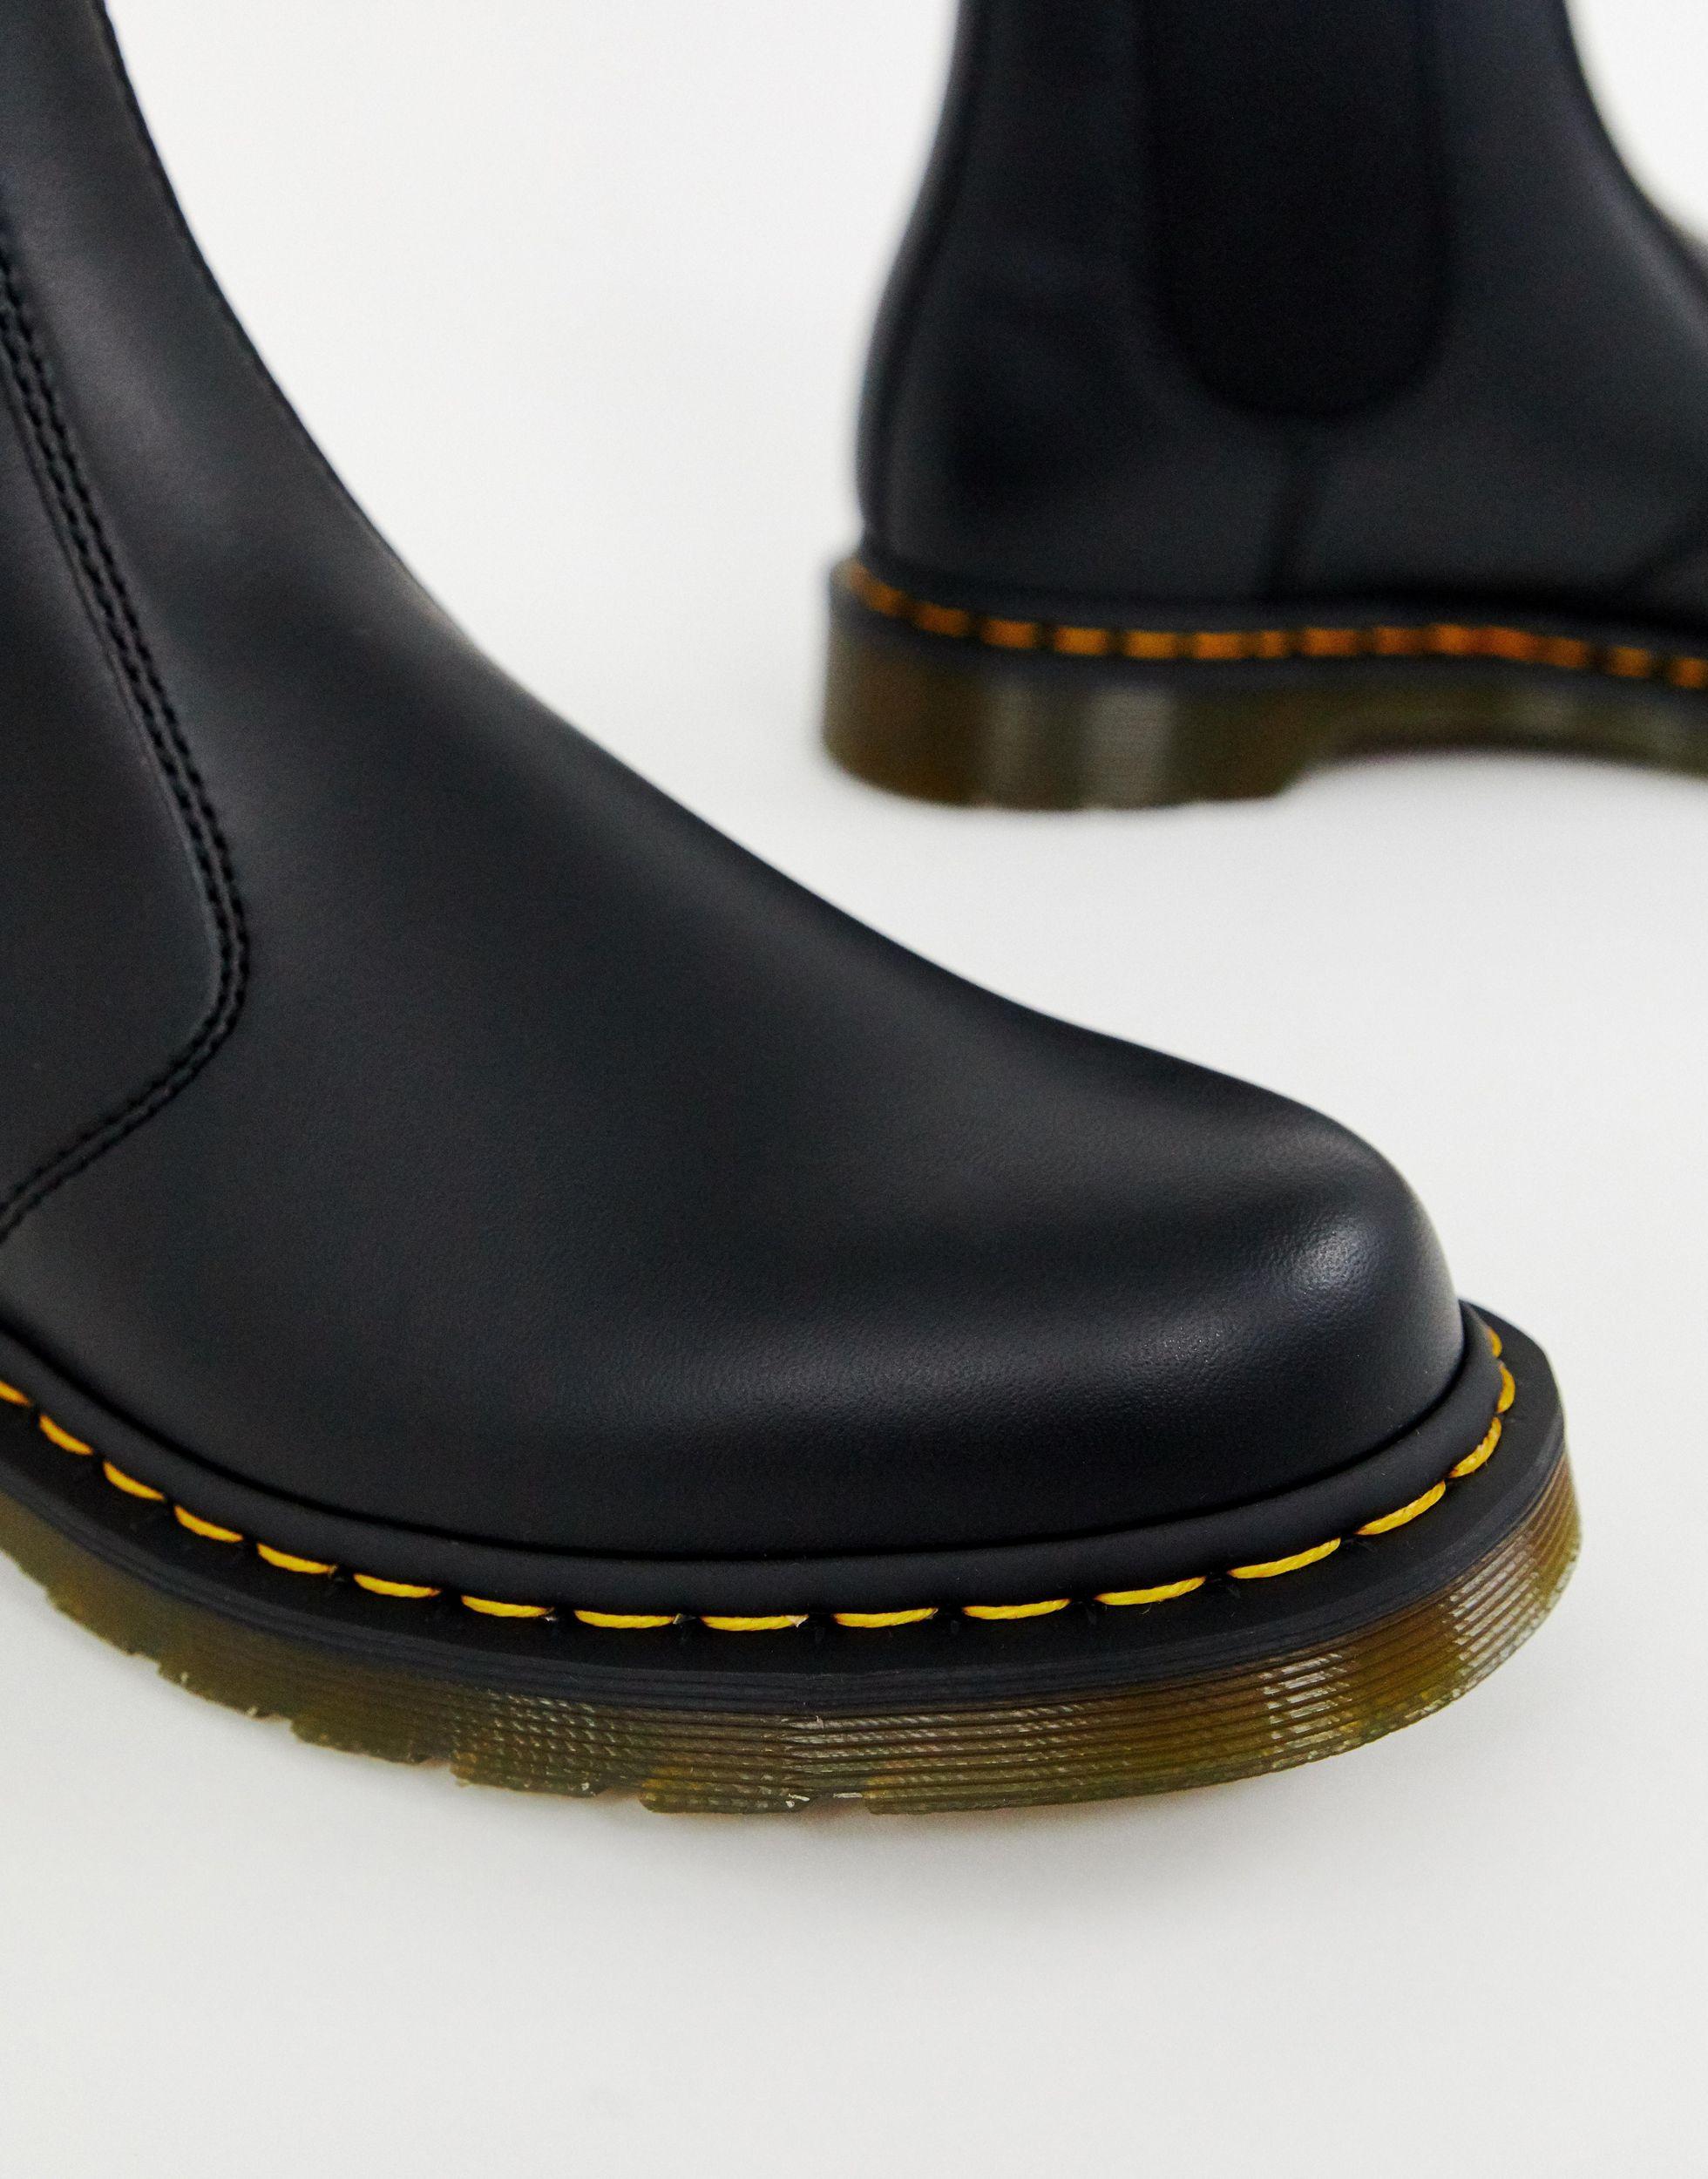 dr martens vegan 2976 chelsea boots in black smooth